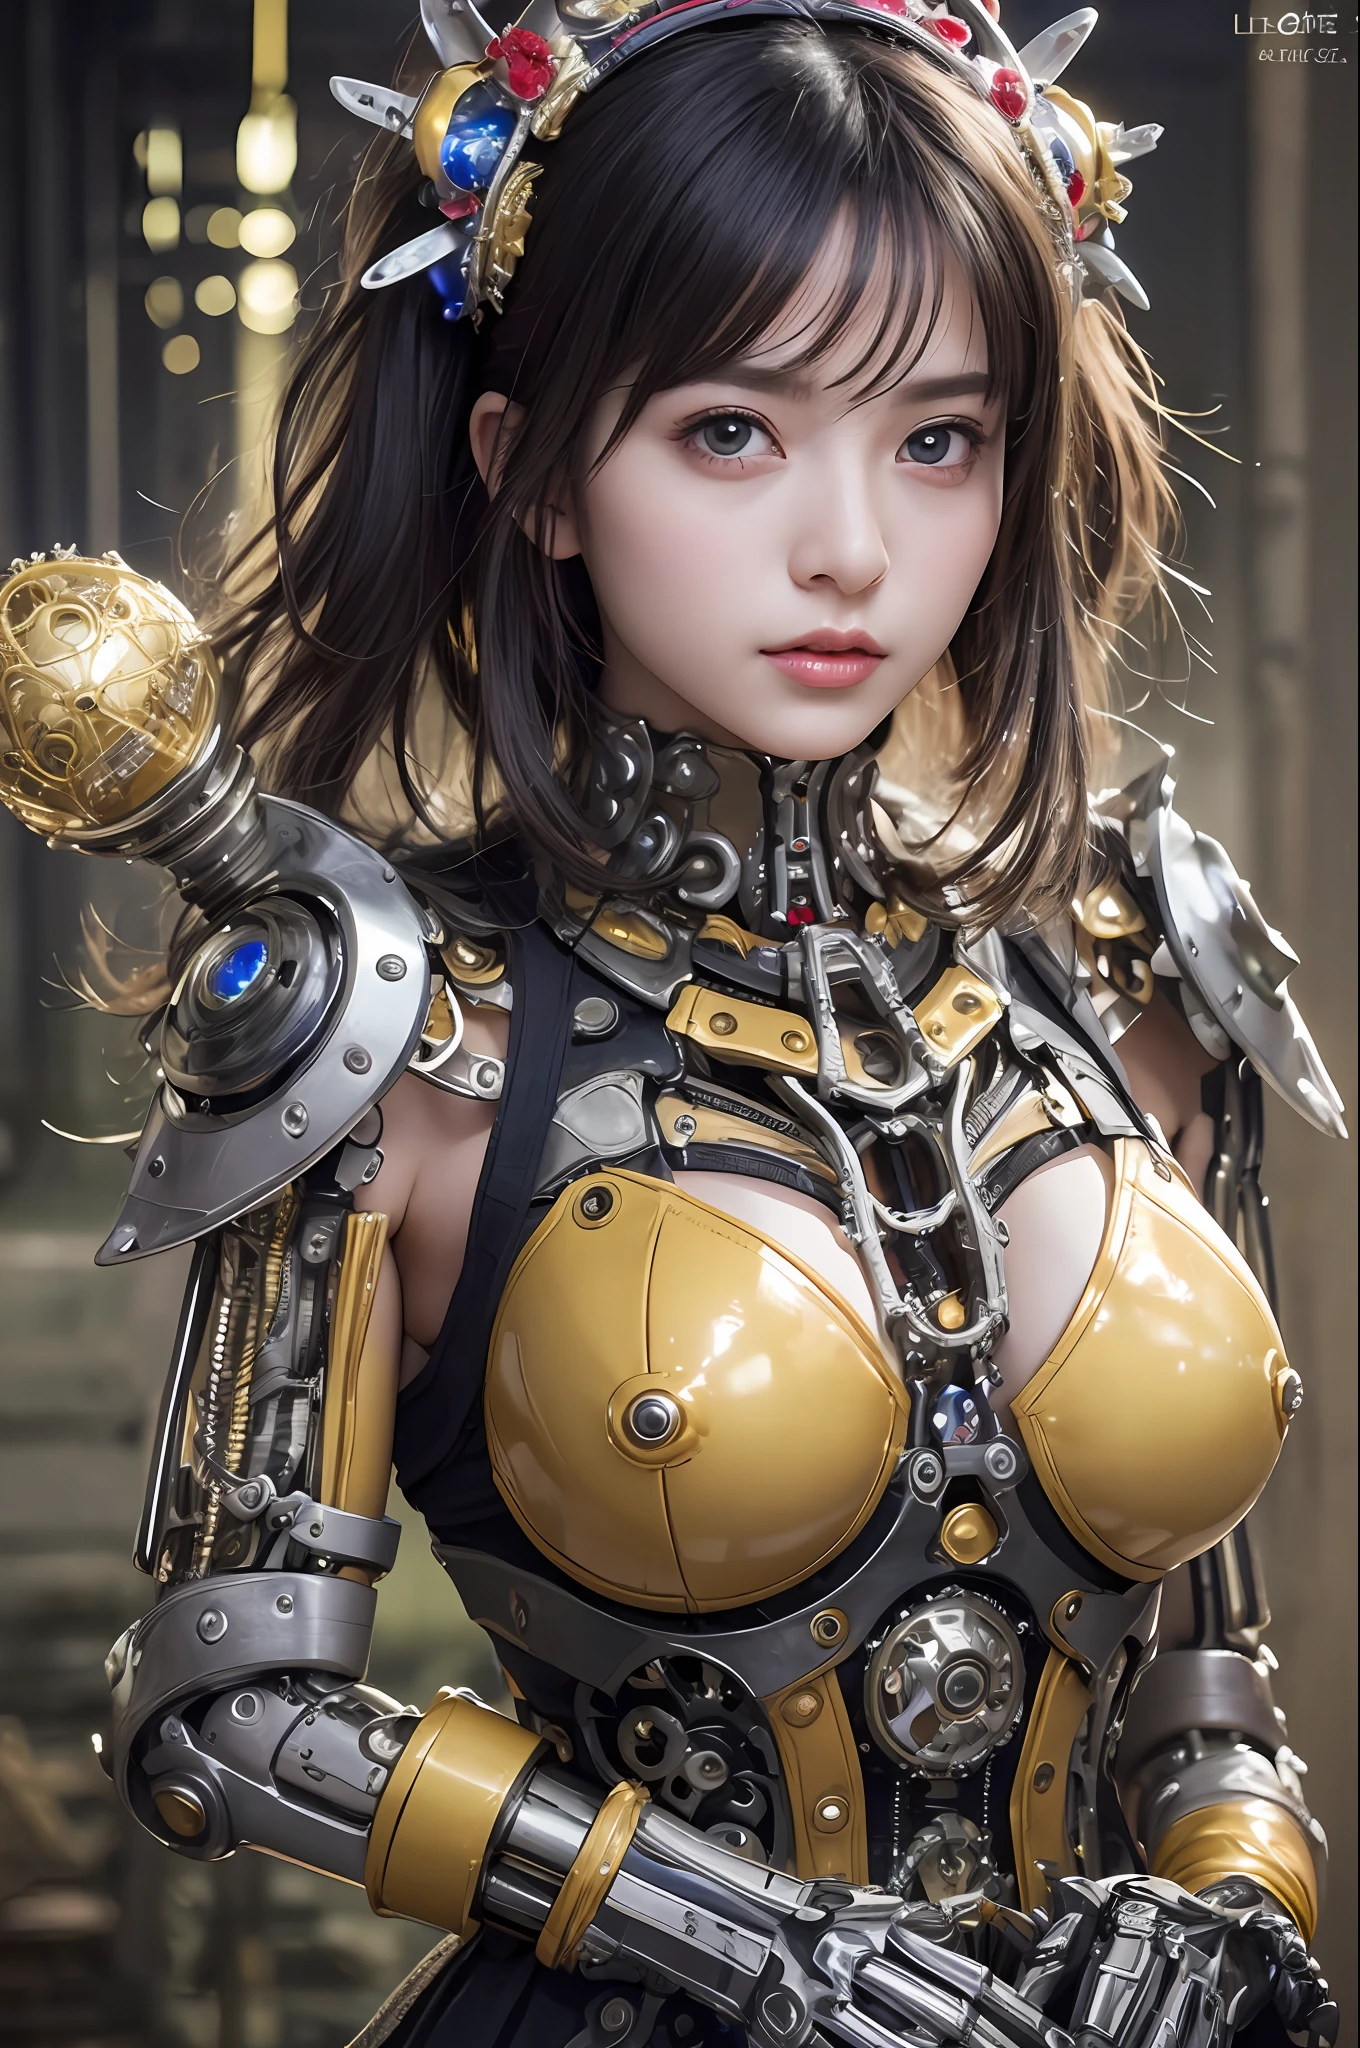 best quality、Masterpiece、ultra-high-resolution、(photoreallistic:1.4)、Raw photo、1 girl、Black hair、glowy skin、1 Mechanical Girl、((hyper realistic detail))、portlate、Global Illumination、Shadow、octane rend、8K、ultrasharp、big tit、Raw skin is exposed in cleavage、metals、Details of complex ornaments、Gothic Lolita details、Analog Meter、cog、gear、golden hydraulic cylinder、hyper intricate details、Realistic light、CGSoation Trends、purple colored eyes、eyes glowing、Facing the camera、neon details、Mechanical limbs、blood vessels connected to tubeechanical vertebrae attached to the back、mechanical cervical attaching to neck、sitting on、Wires and cables connecting to the head、Small LED lamp、